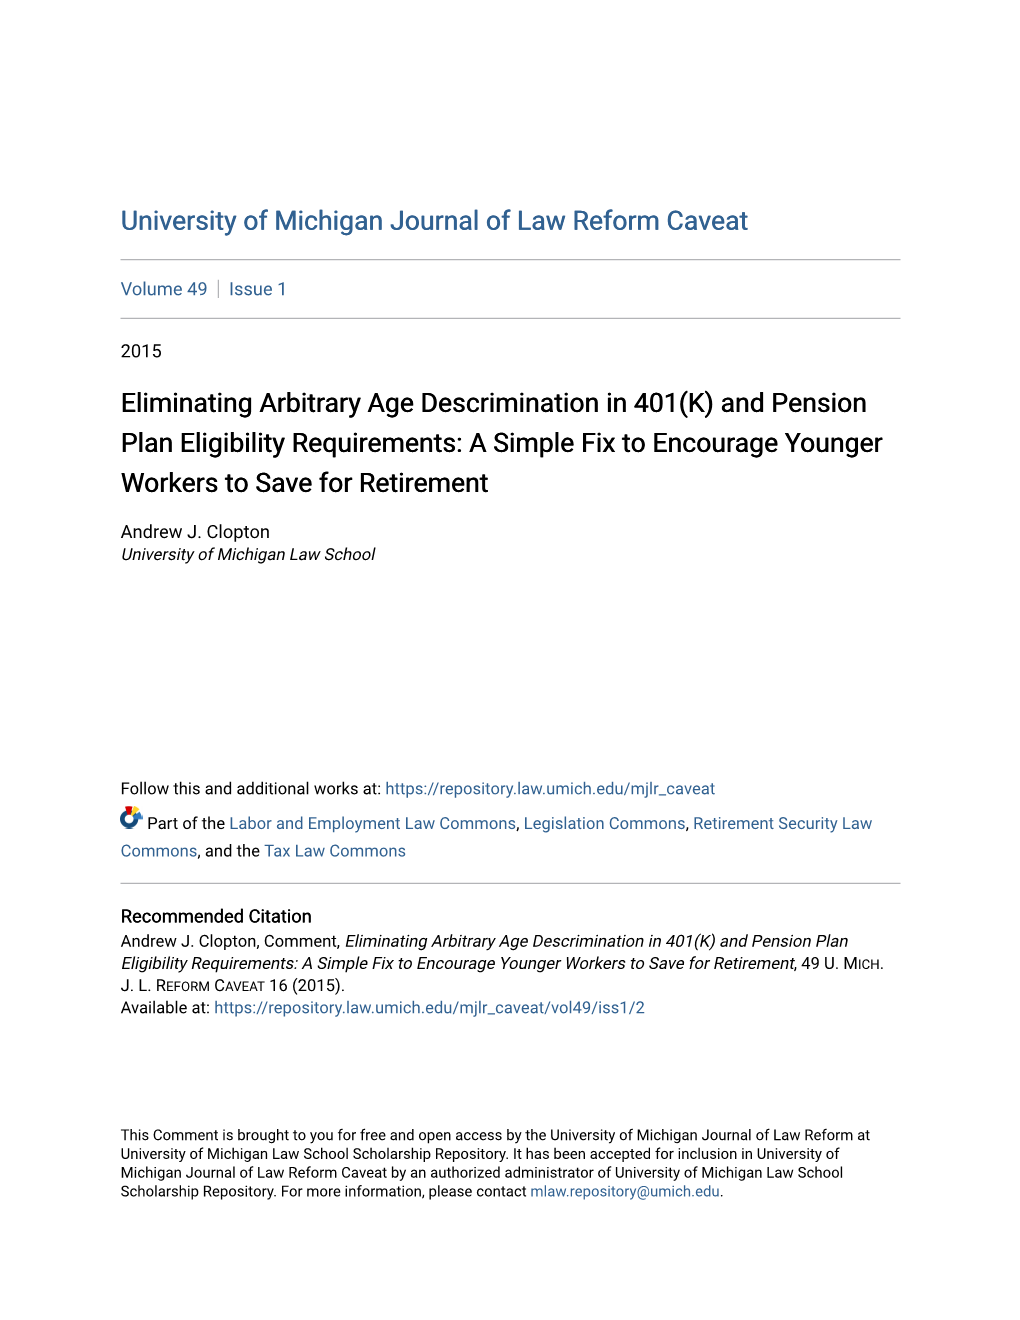 Eliminating Arbitrary Age Descrimination in 401(K) and Pension Plan Eligibility Requirements: a Simple Fix to Encourage Younger Workers to Save for Retirement